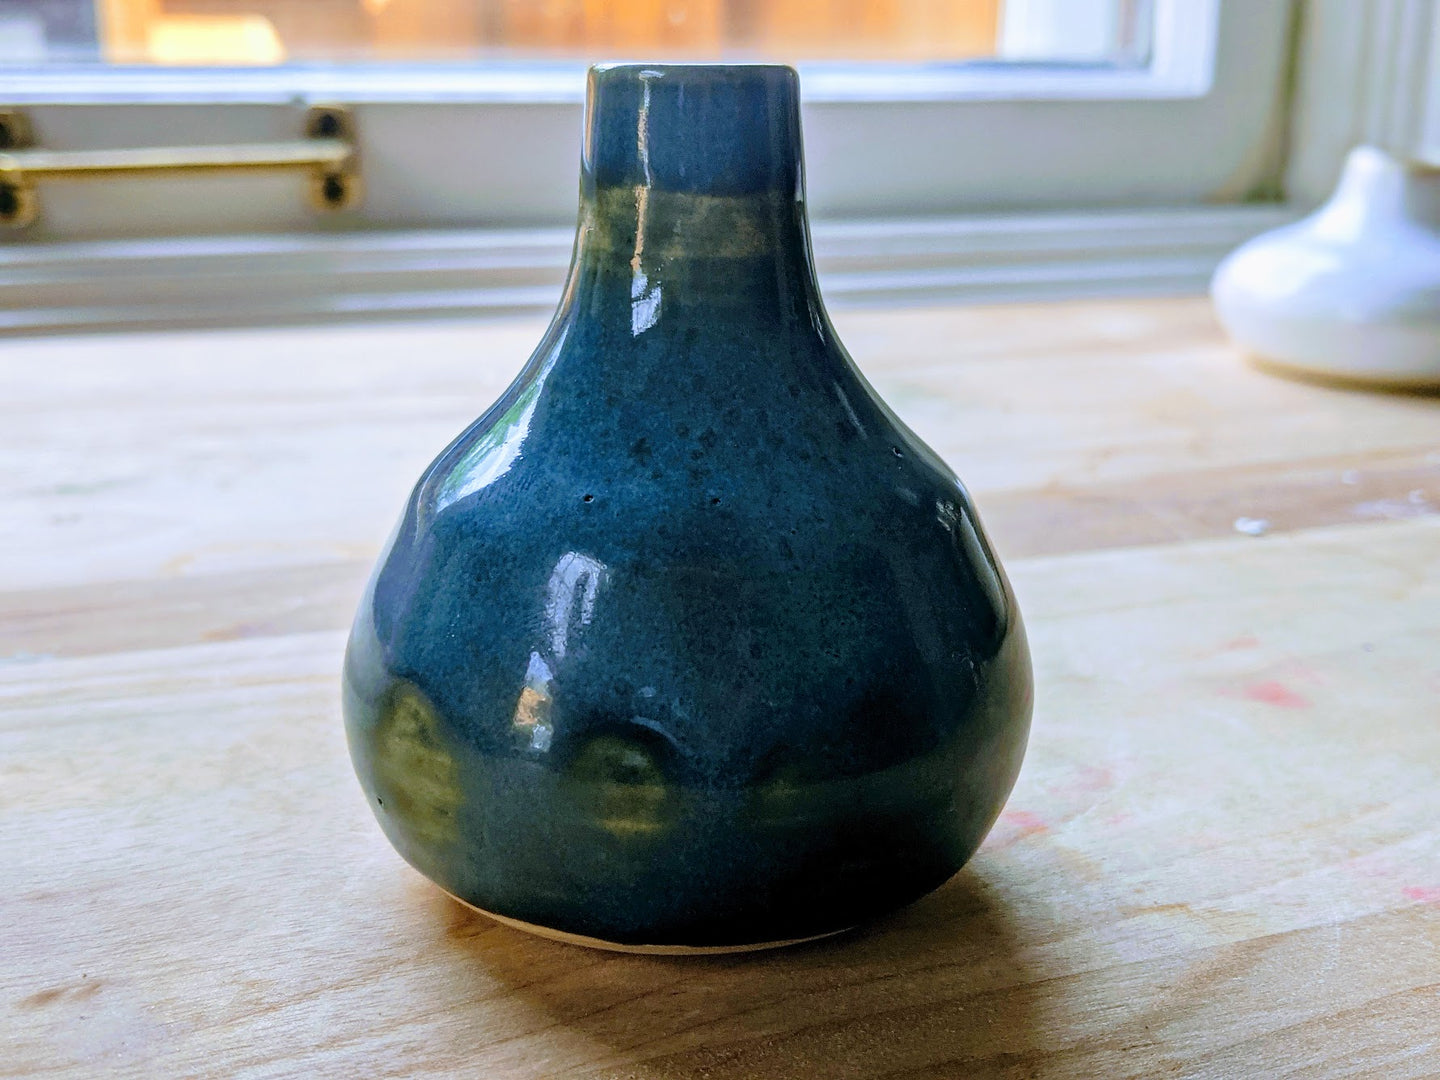 Small blue bud vase with dark green accents.